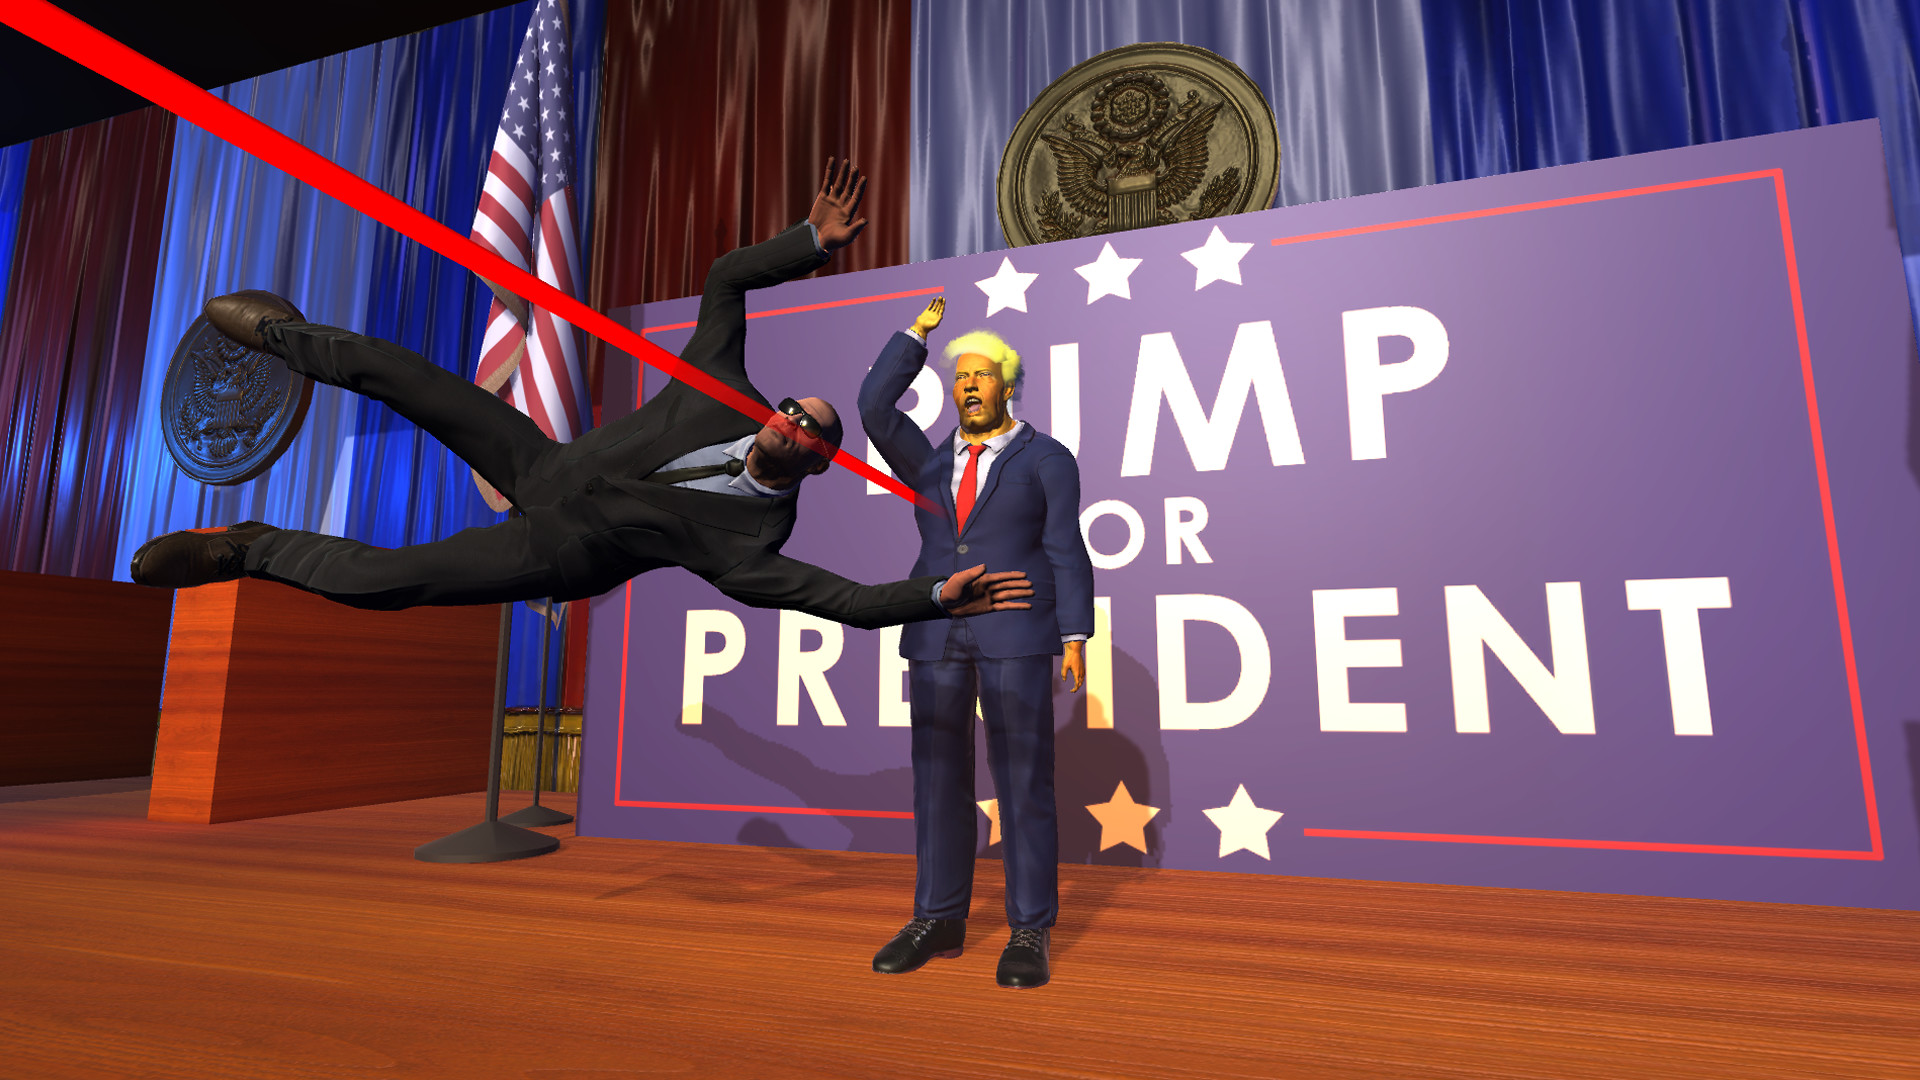 Mr.President! PC Game Latest Version Free Download